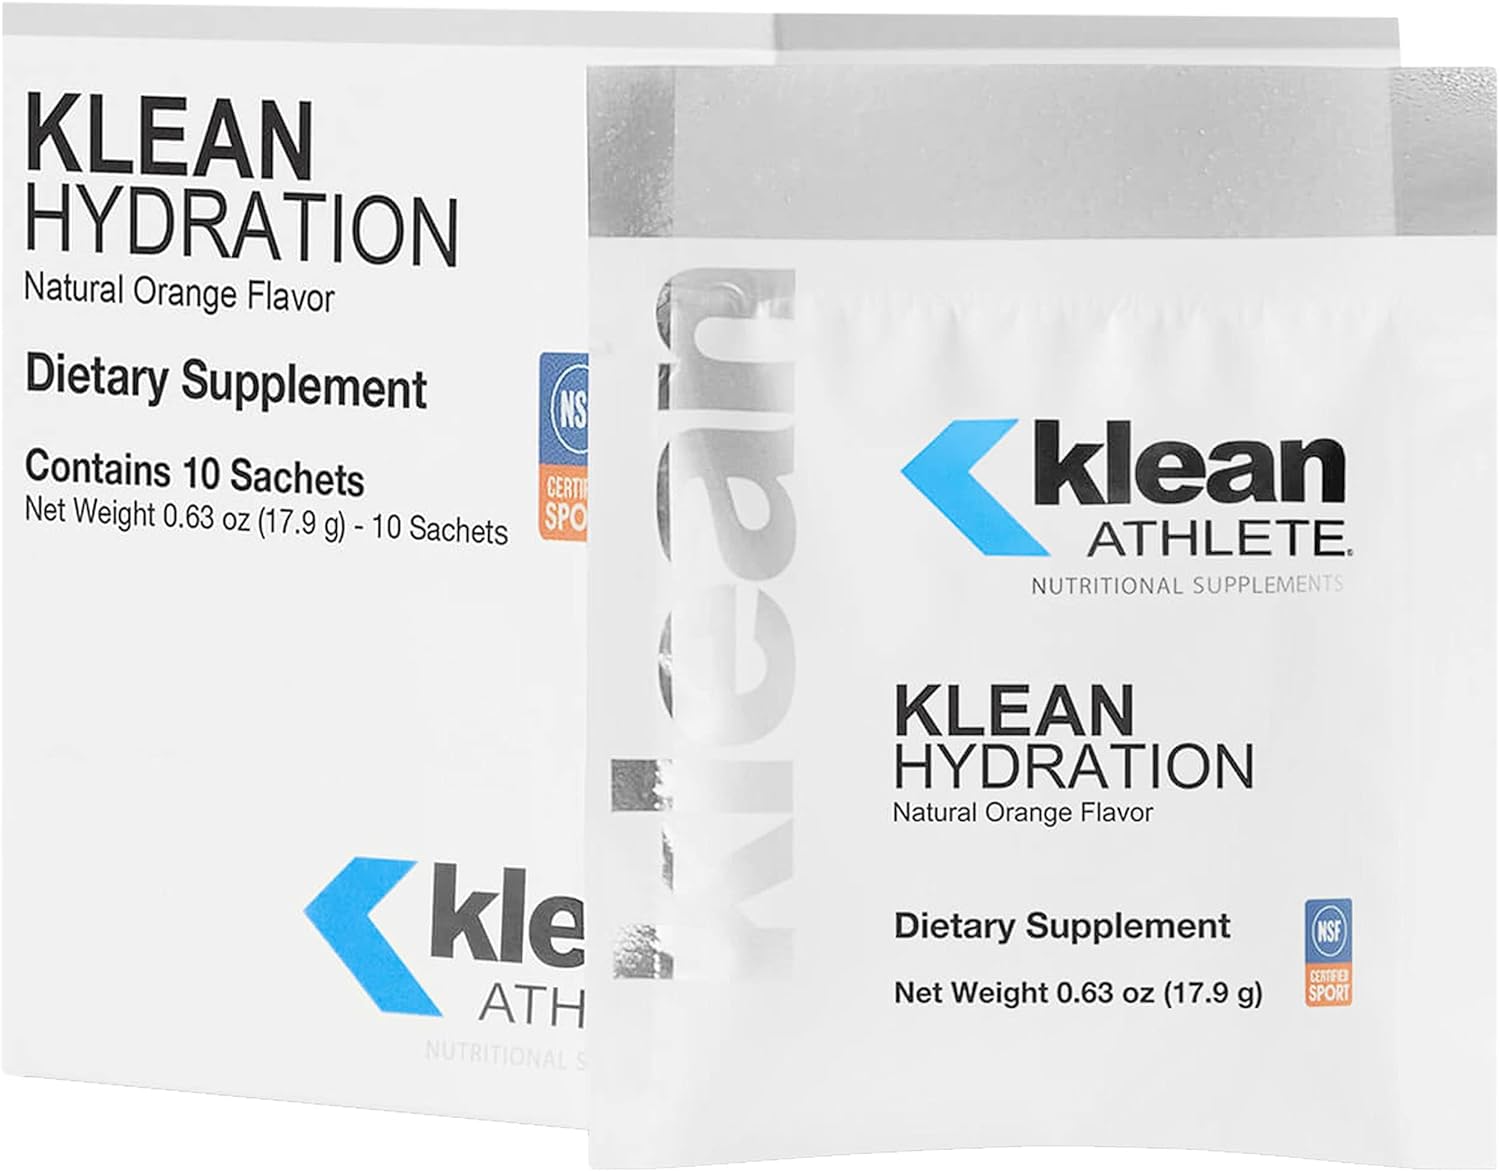 Klean ATHLETE Klean Hydration | Electrolyte Replacement Formula to Hyd